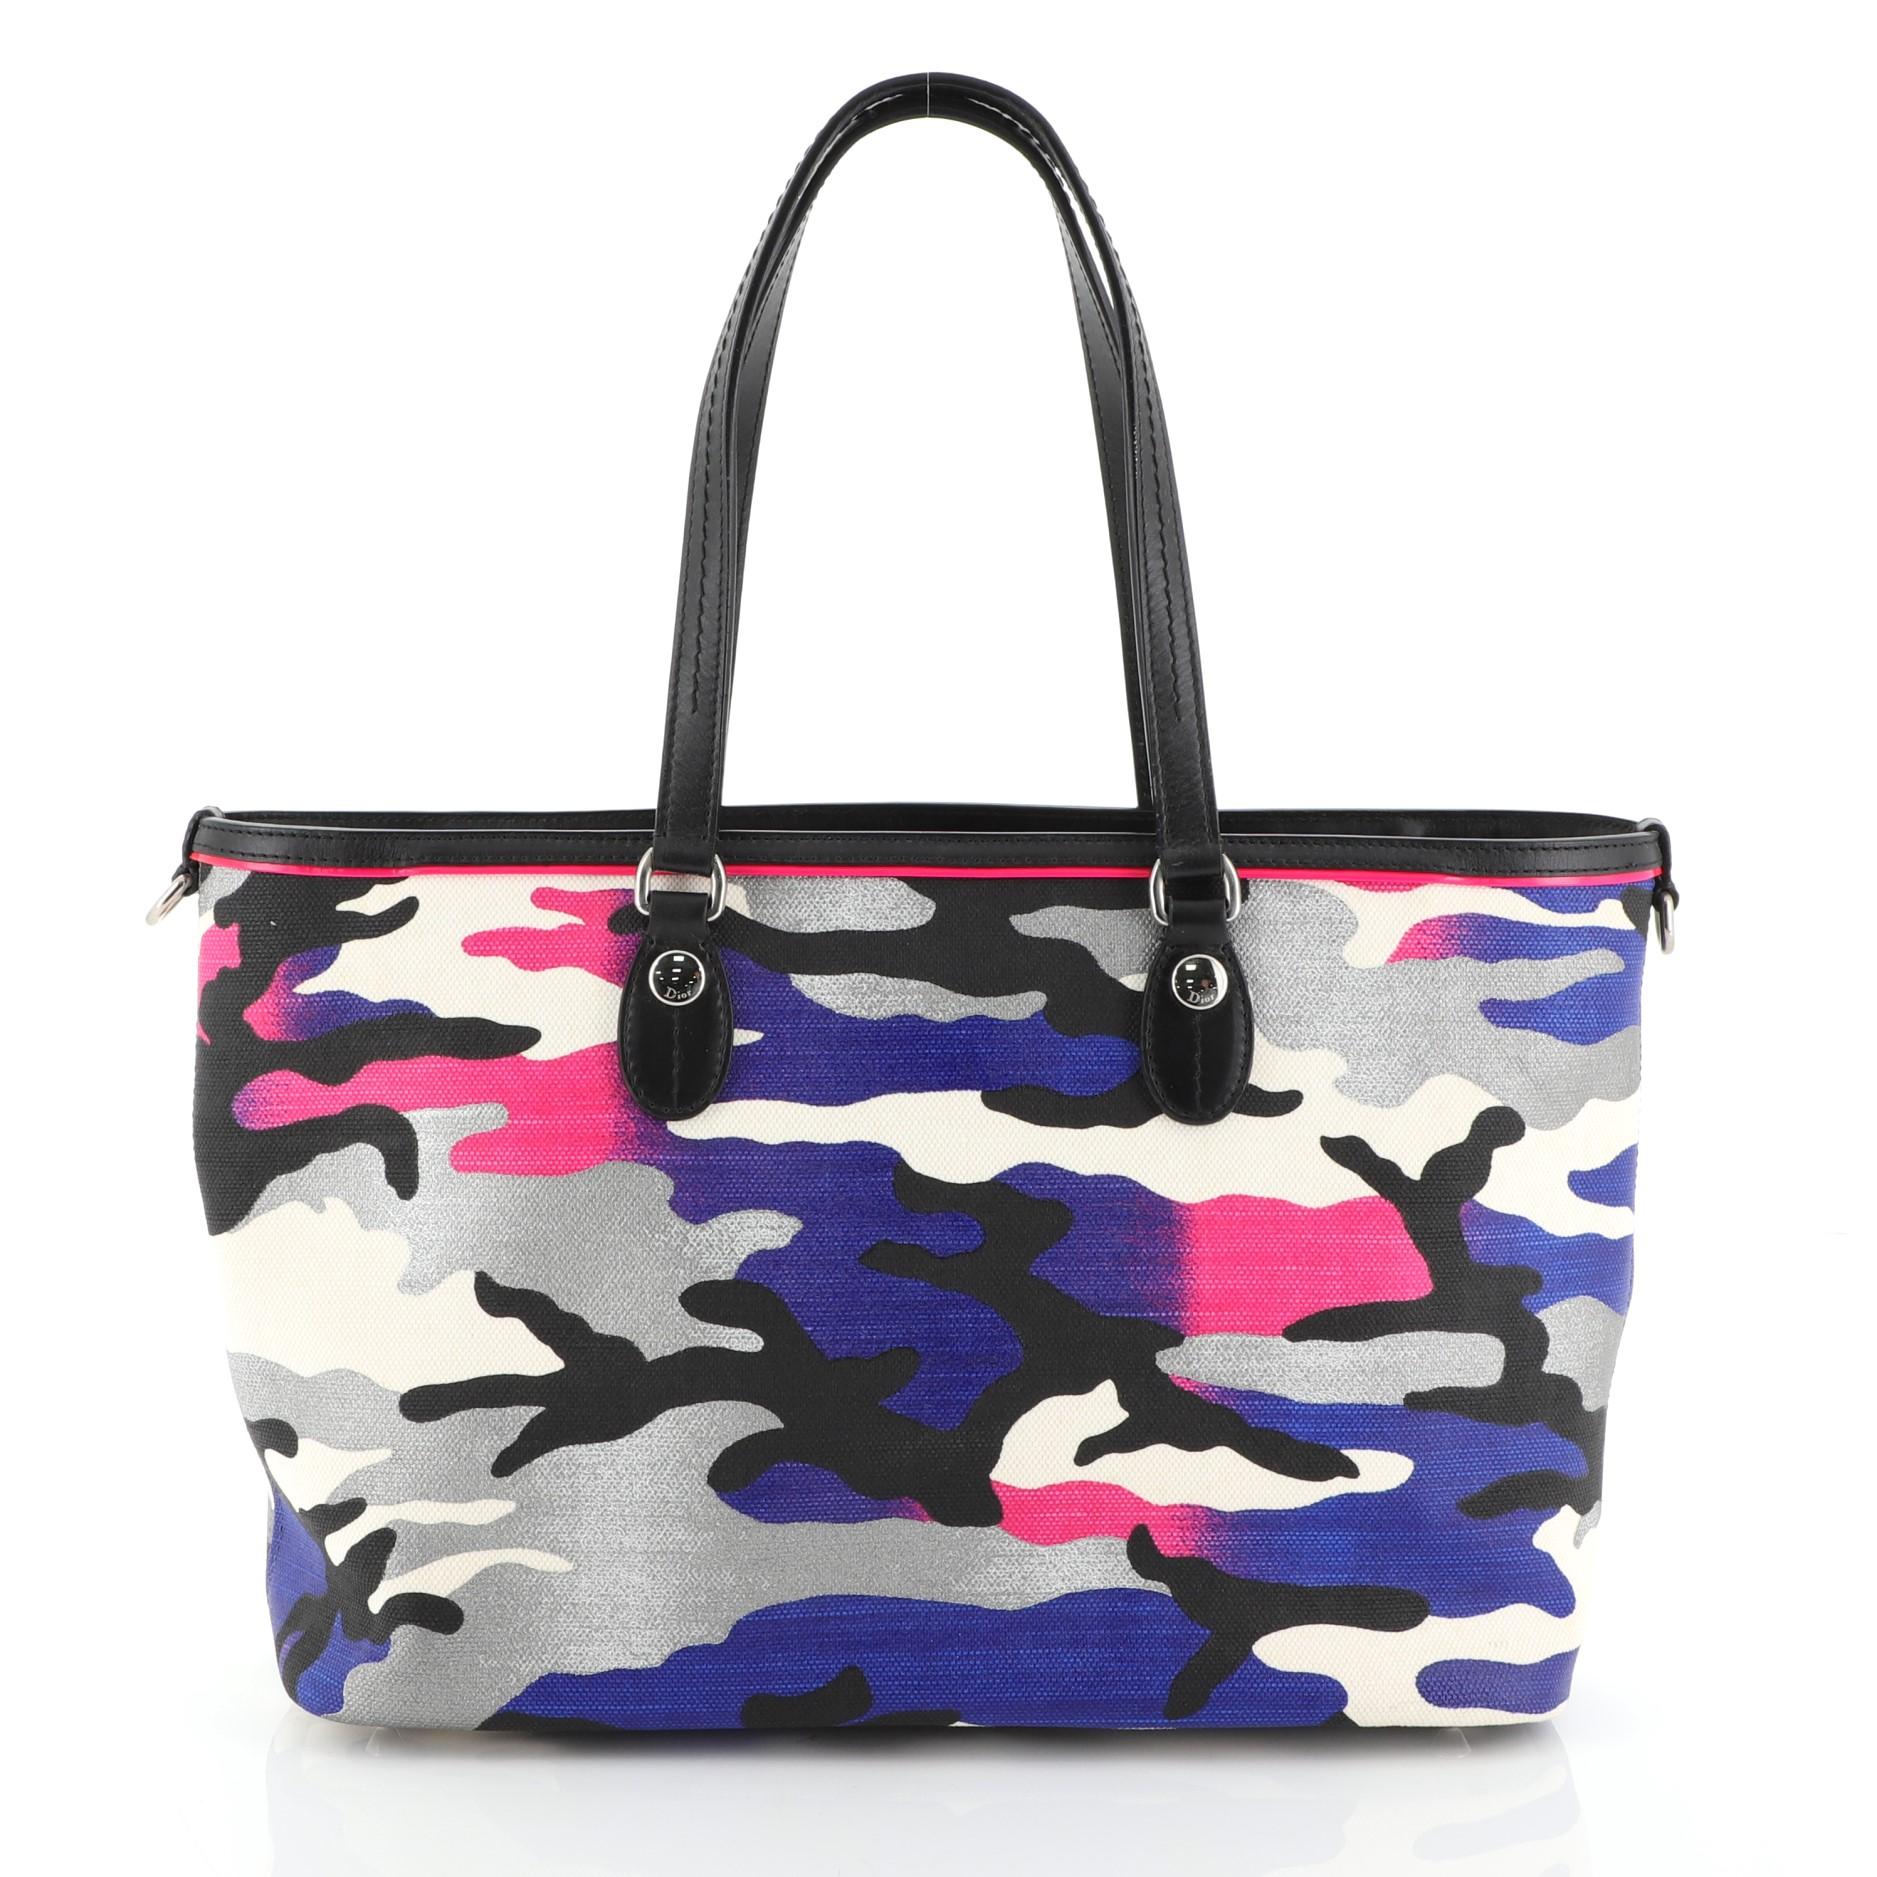 Black Christian Dior Open Tote Limited Edition Anselm Reyle Camouflage Canvas Medium 